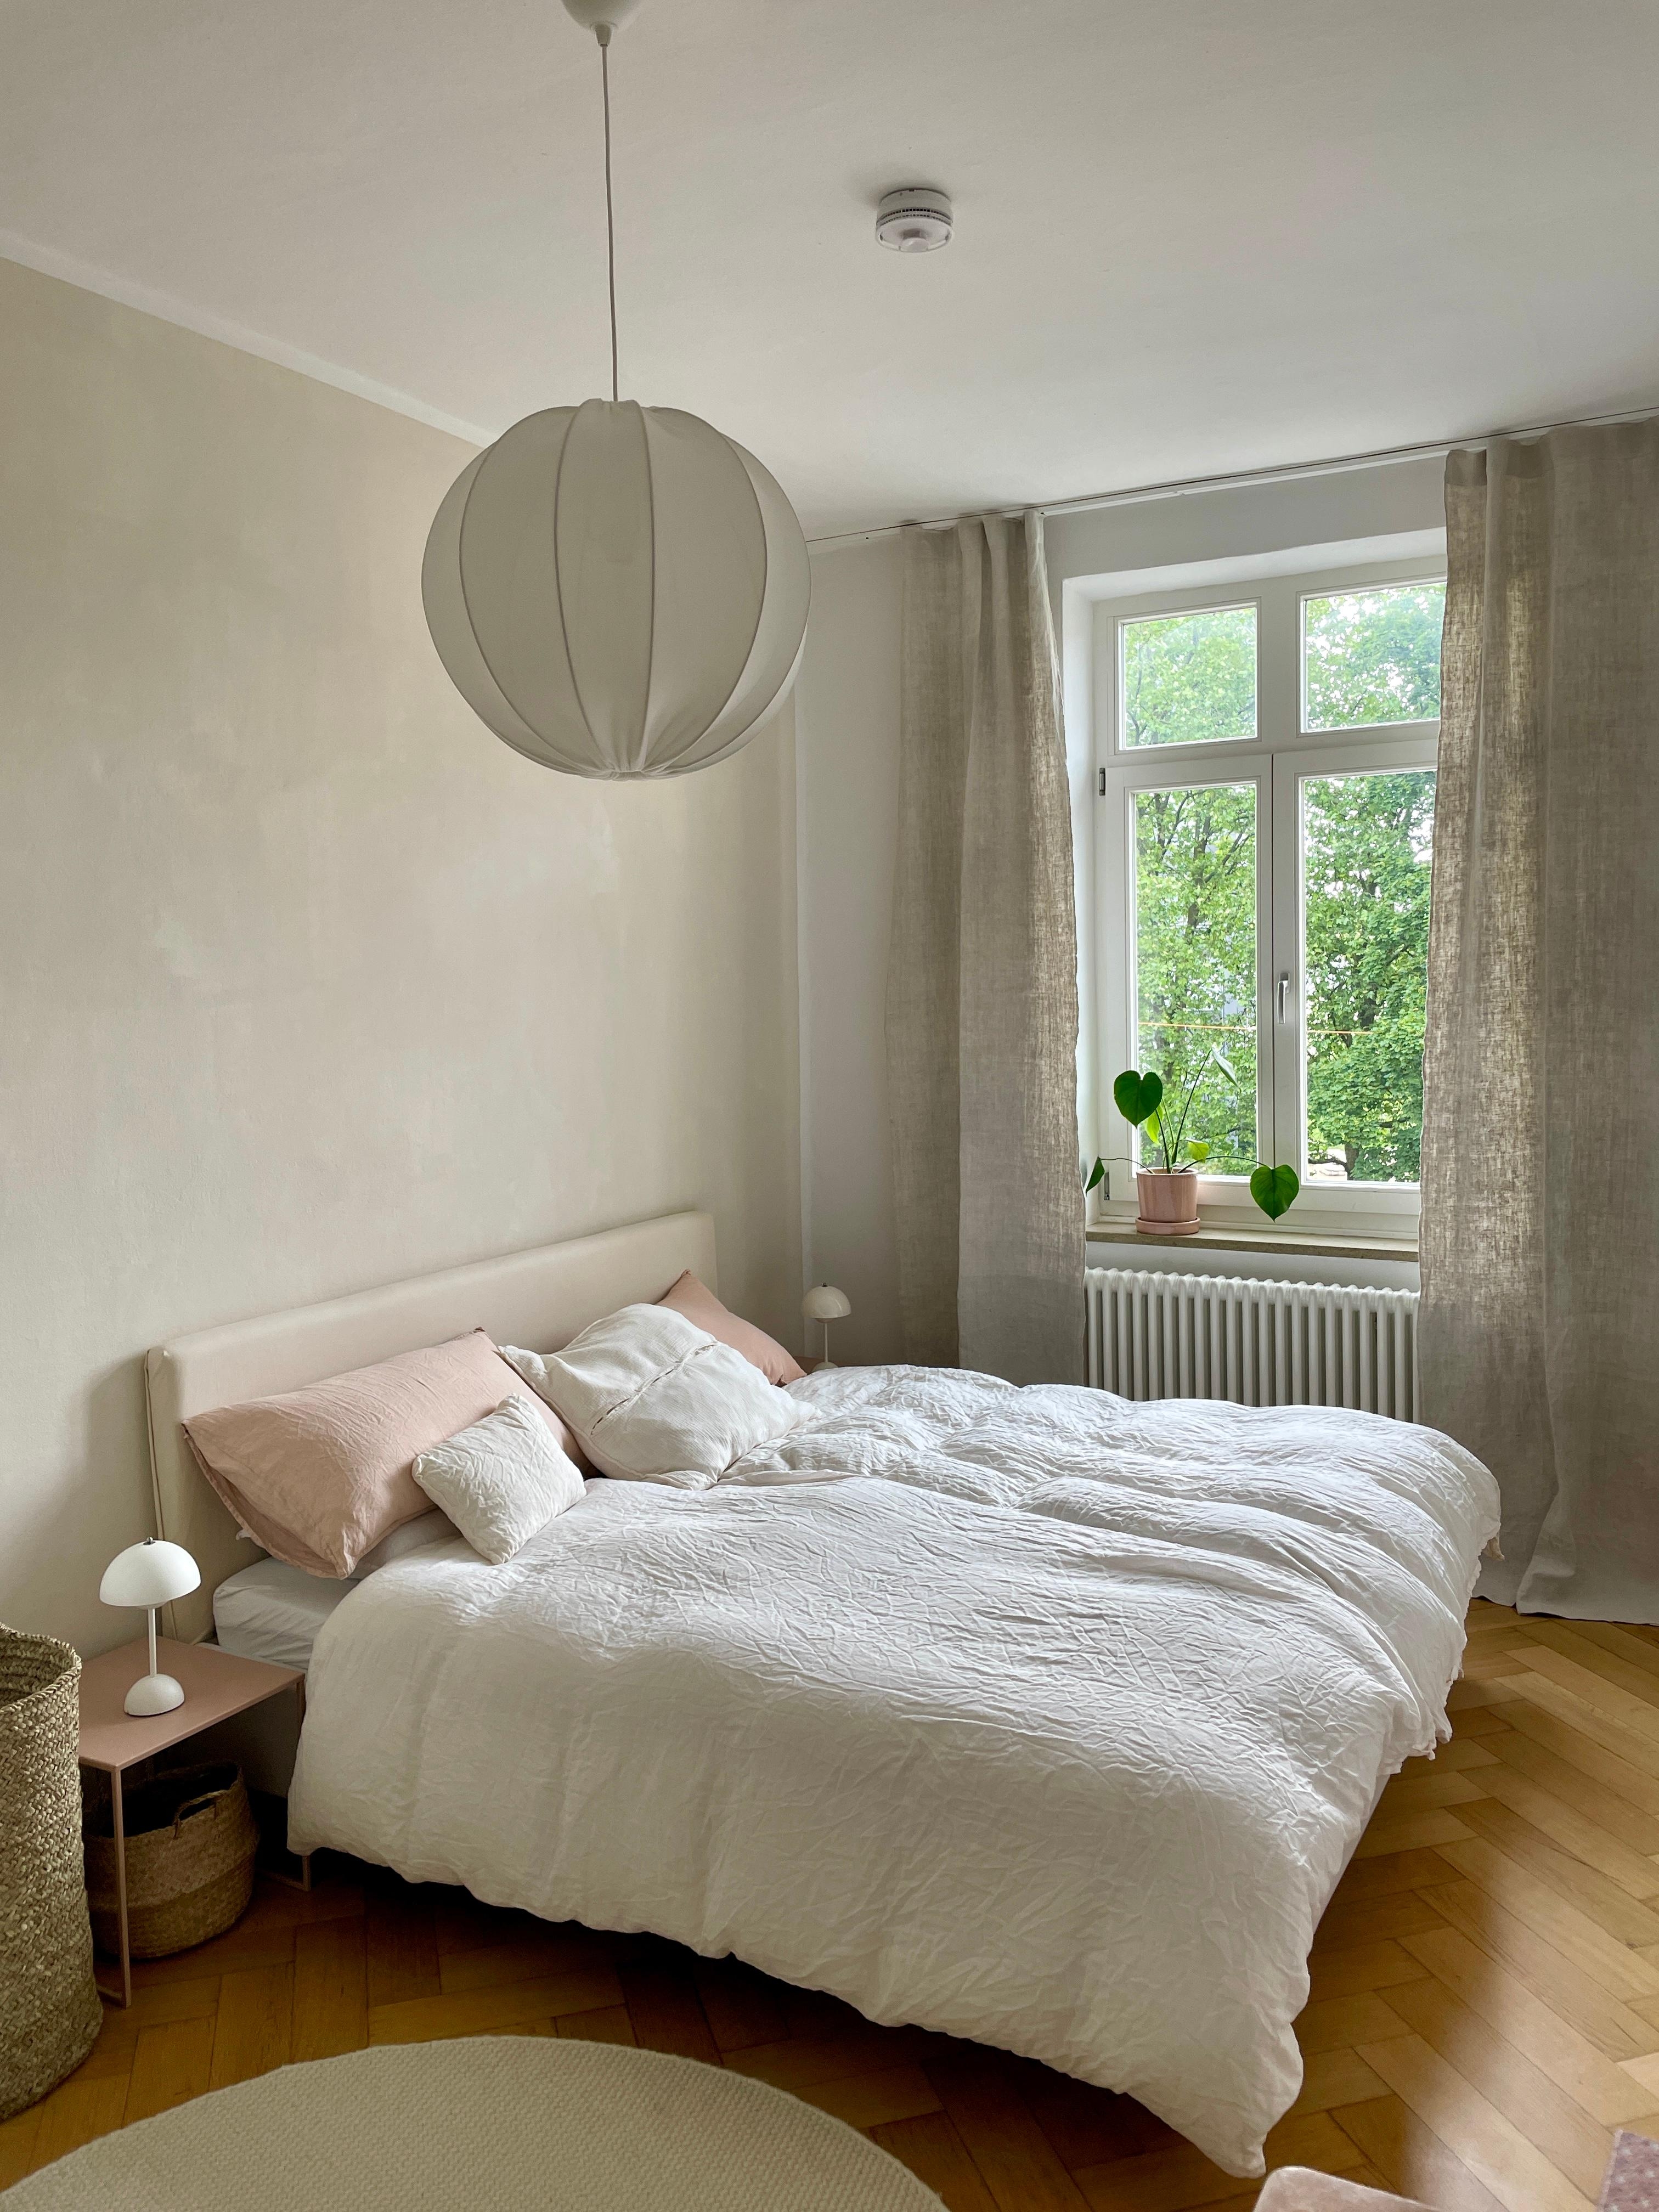 Our new home #zuhause #interior #naturalcolors #schlafzimmer